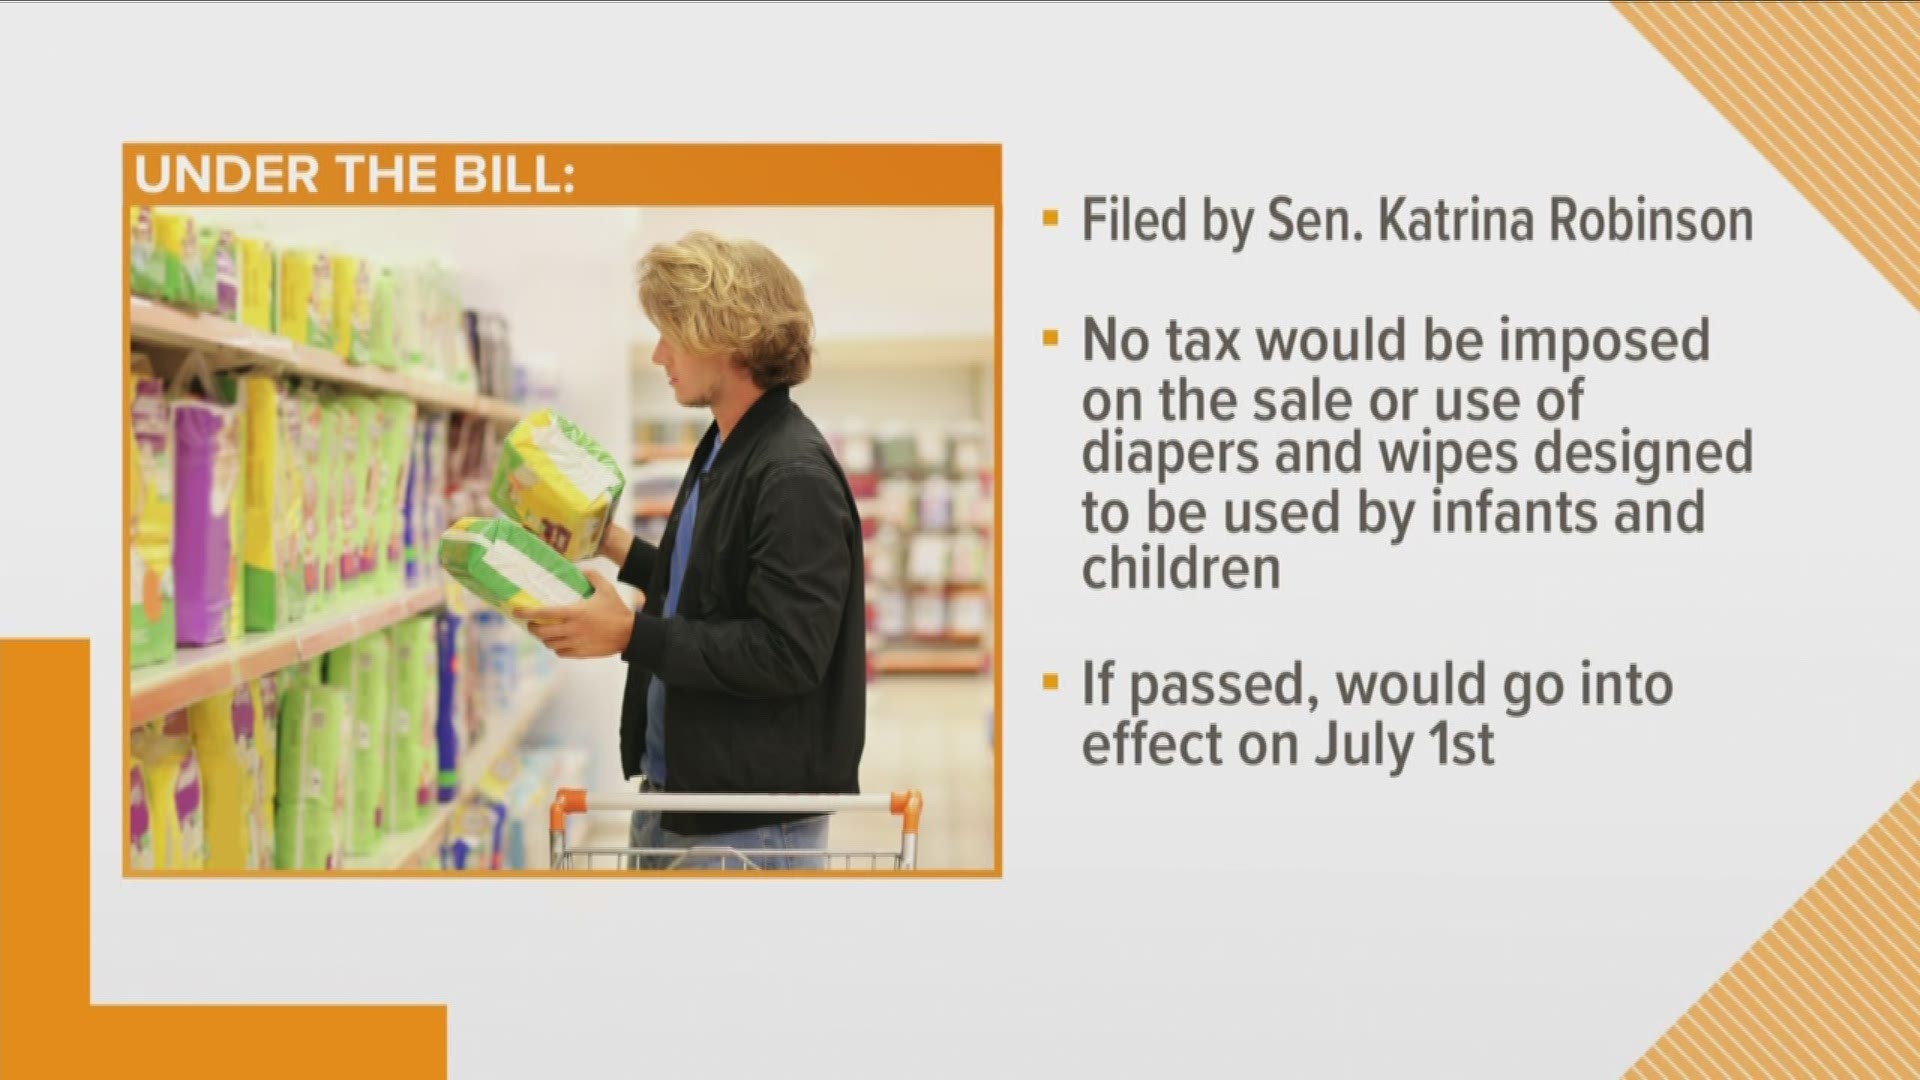 Under SB 1905, no tax would be imposed on the sale of diapers and wipes meant for infants and children.